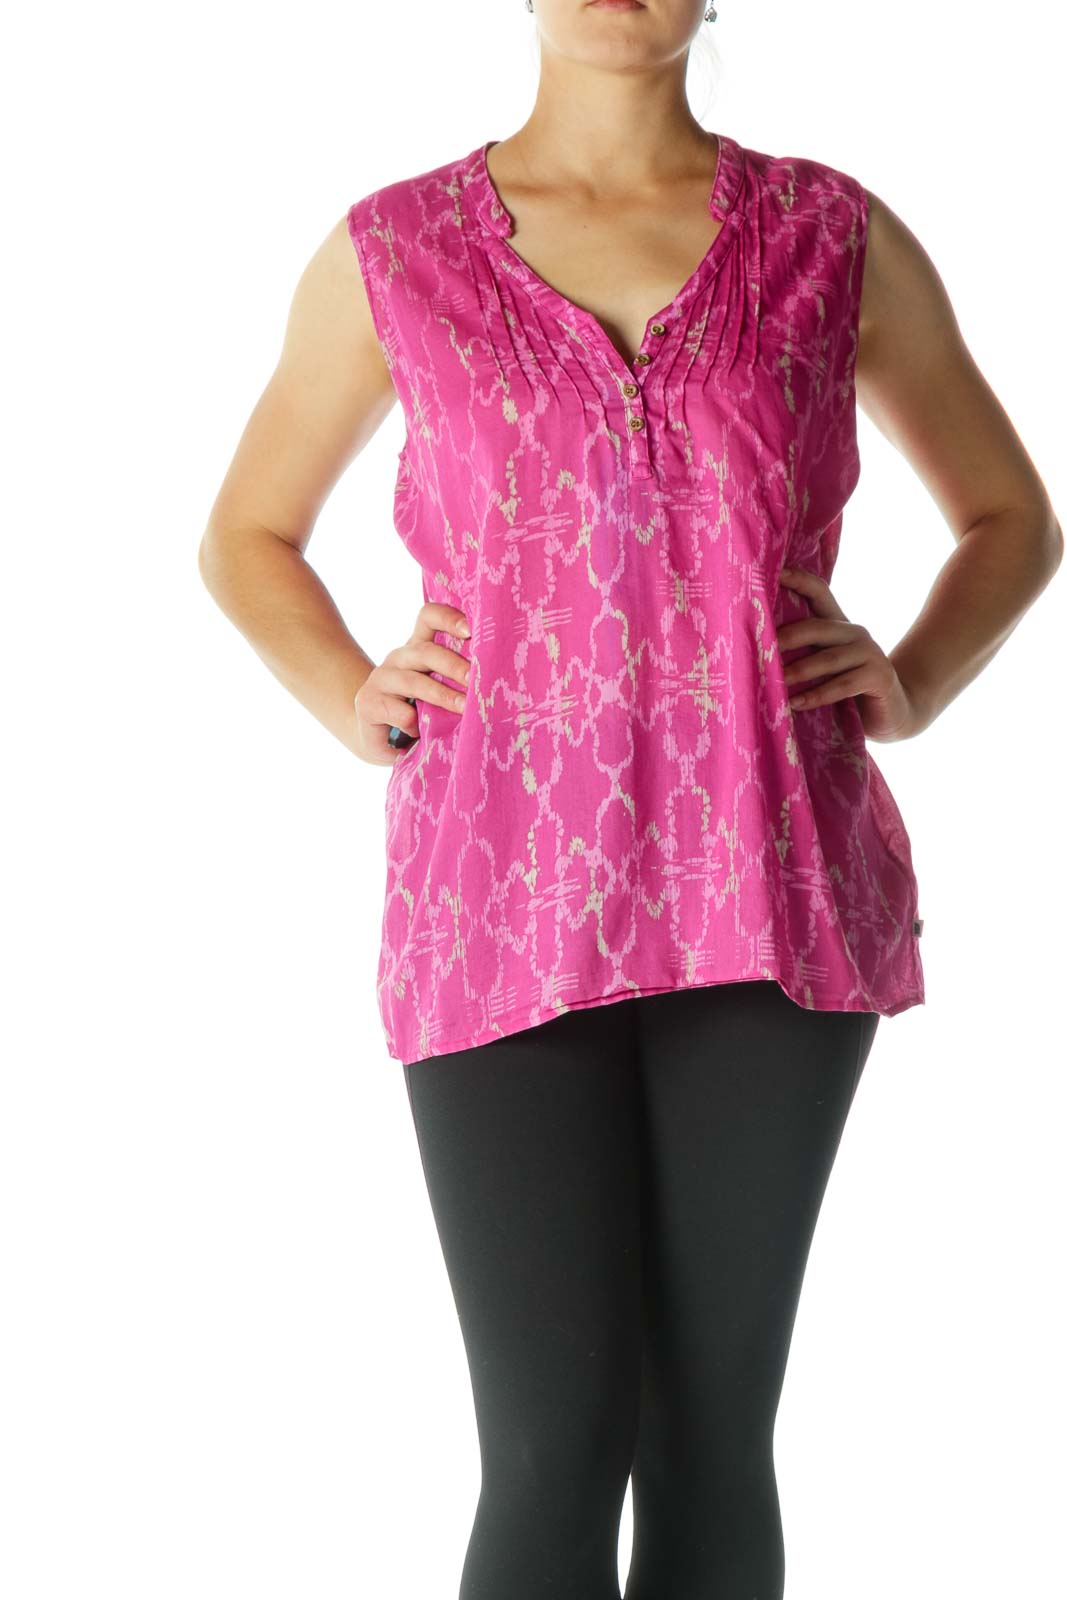 Pink and Cream Print Sleeveless Tunic Front